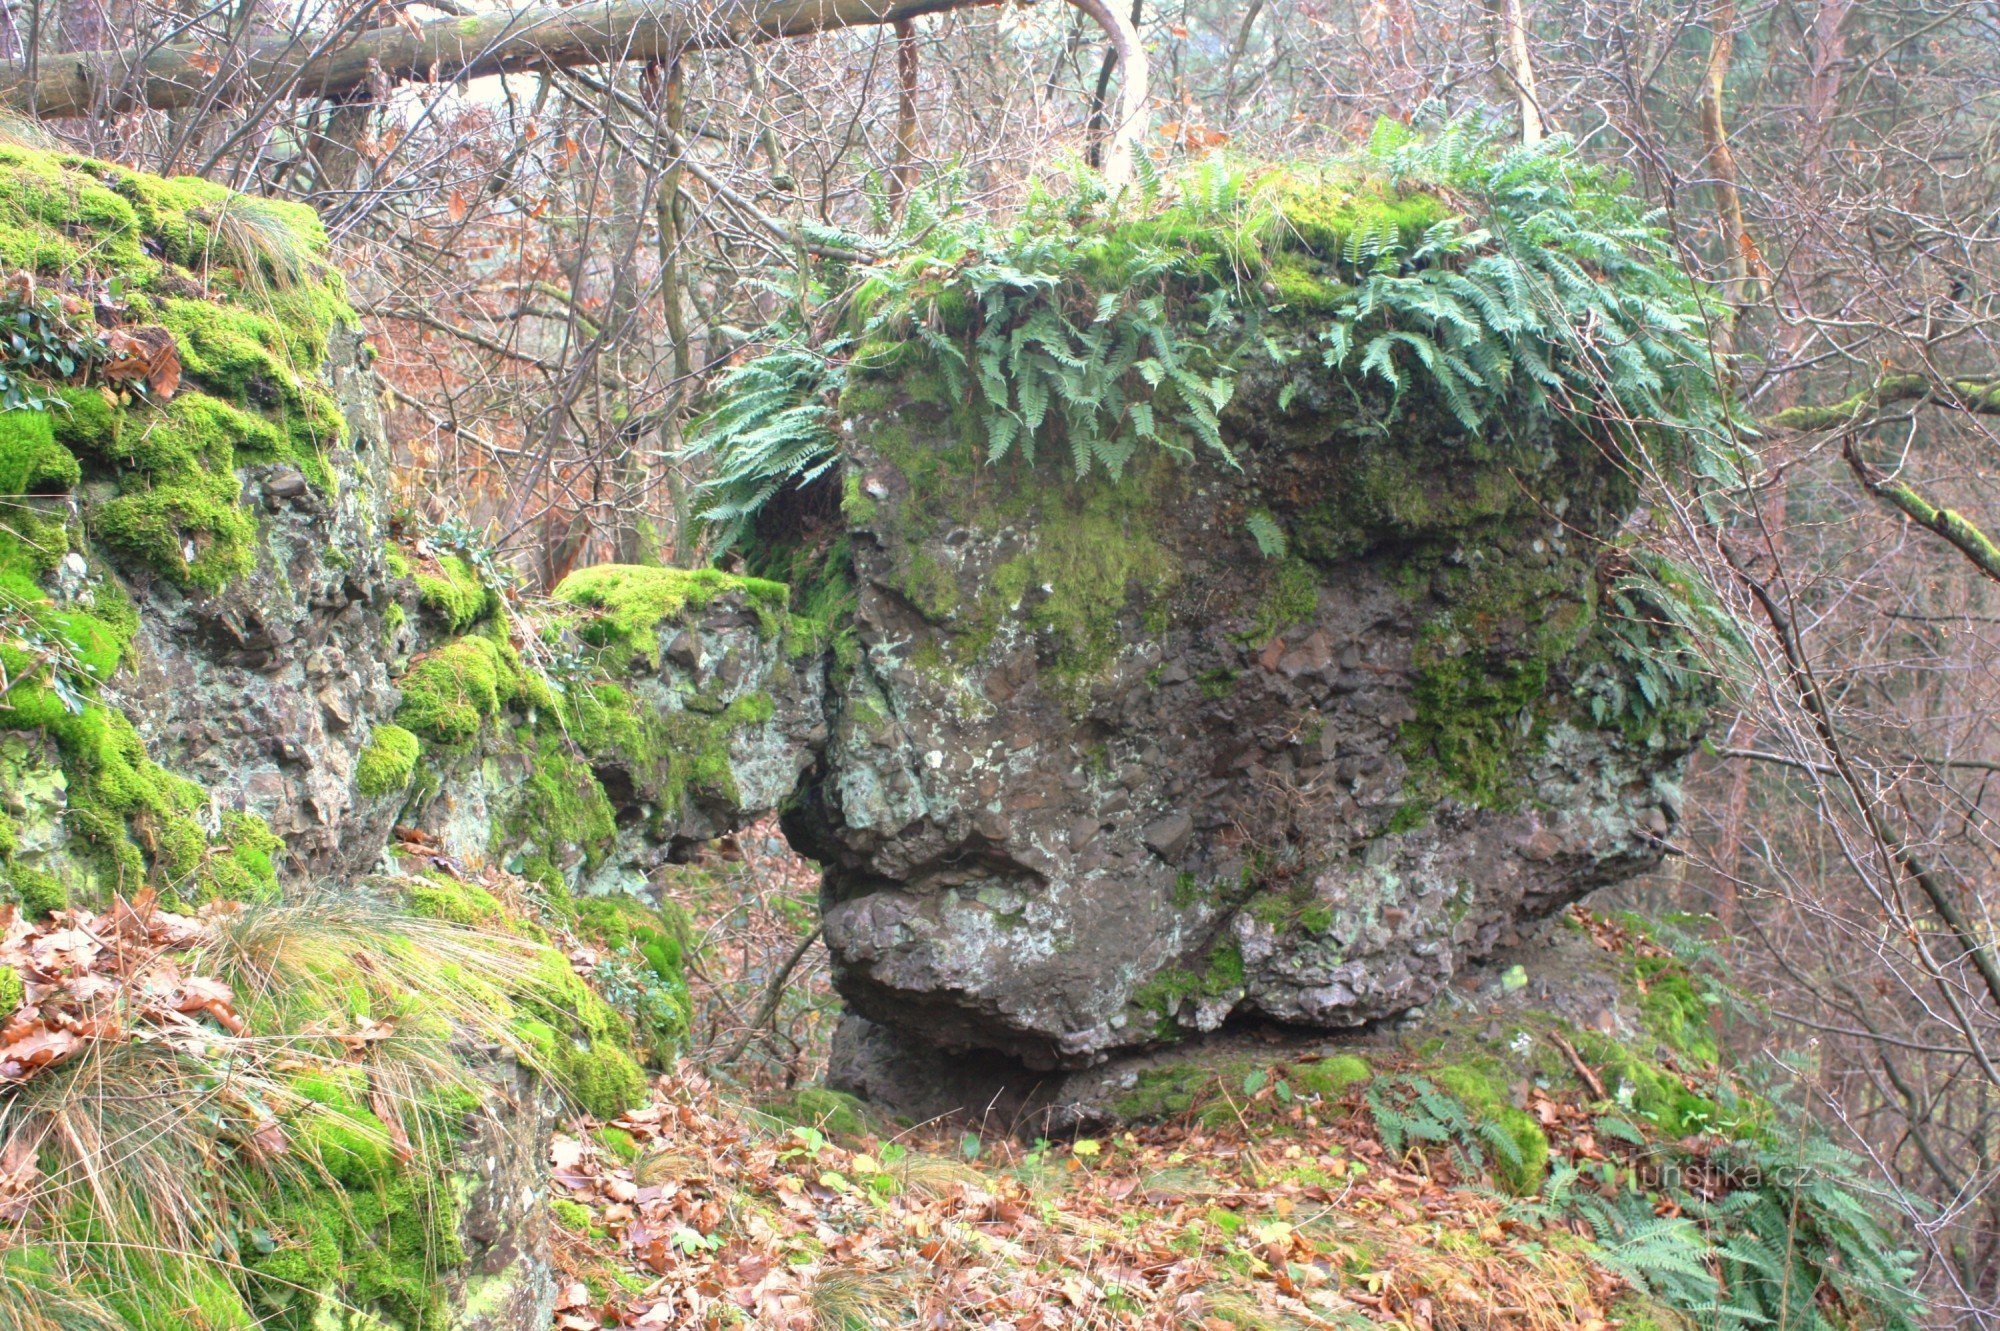 Giant's Head rock formation